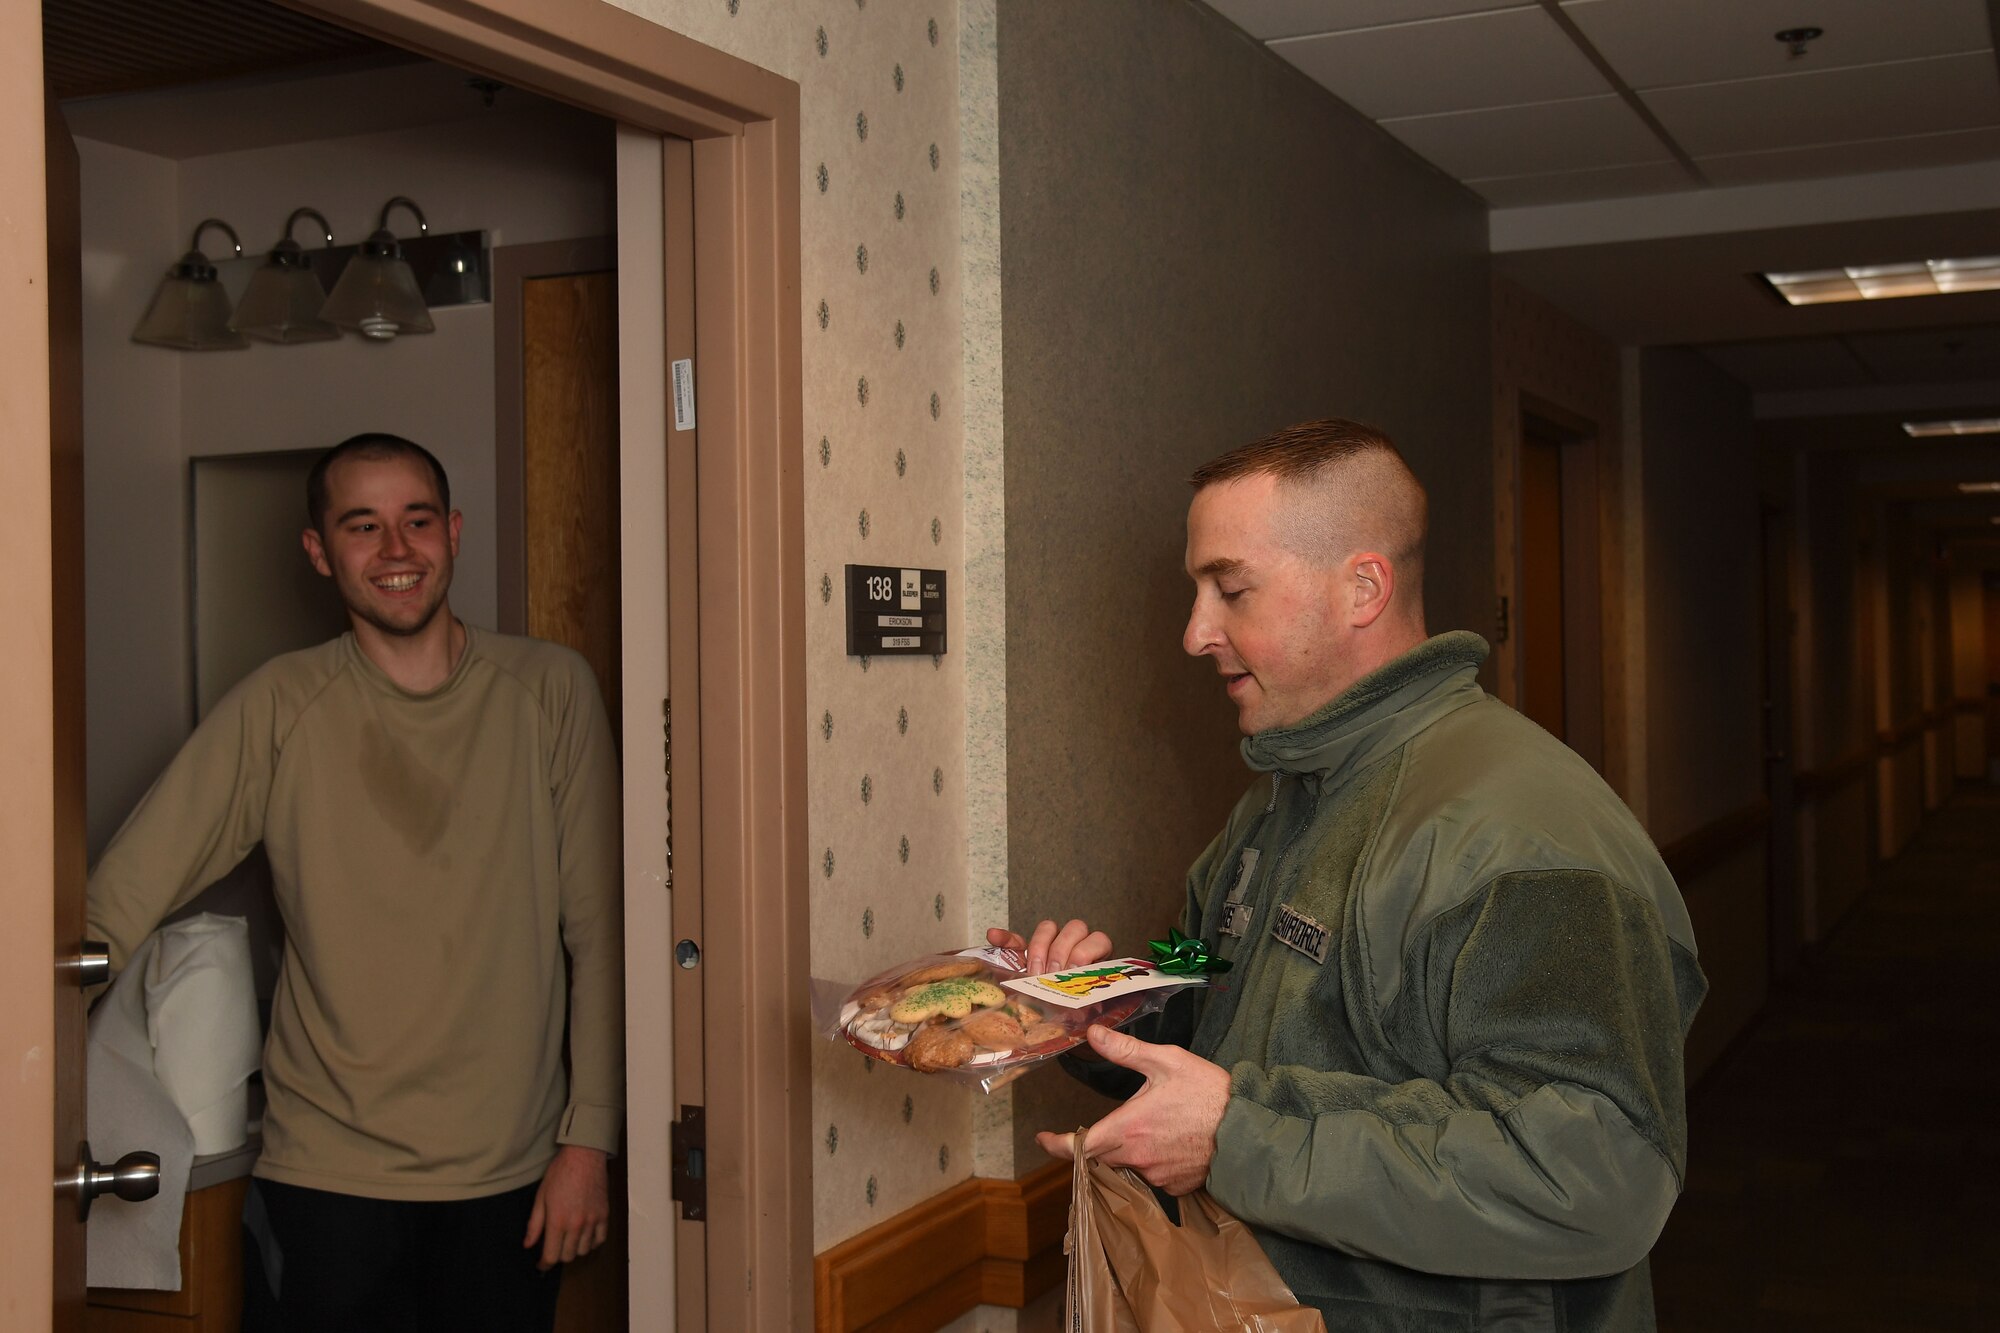 Master Sgt. Scott Harris, first sergeant with the 319th Logistics Readiness Squadron, right, delivers a plate of cookies to Airman 1st Class Austin Erickson, lodging assistant with the 319th Force Support Squadron, during the annual cookie drive on Grand Forks Air Force Base, N.D., on Dec. 4, 2017. Erickson is one of the hundreds of Airmen living in the dorms who each received a plate of treats donated by members of the Spouses Club on base and the local community. (U.S. Air Force photo by Elora J. Martinez)